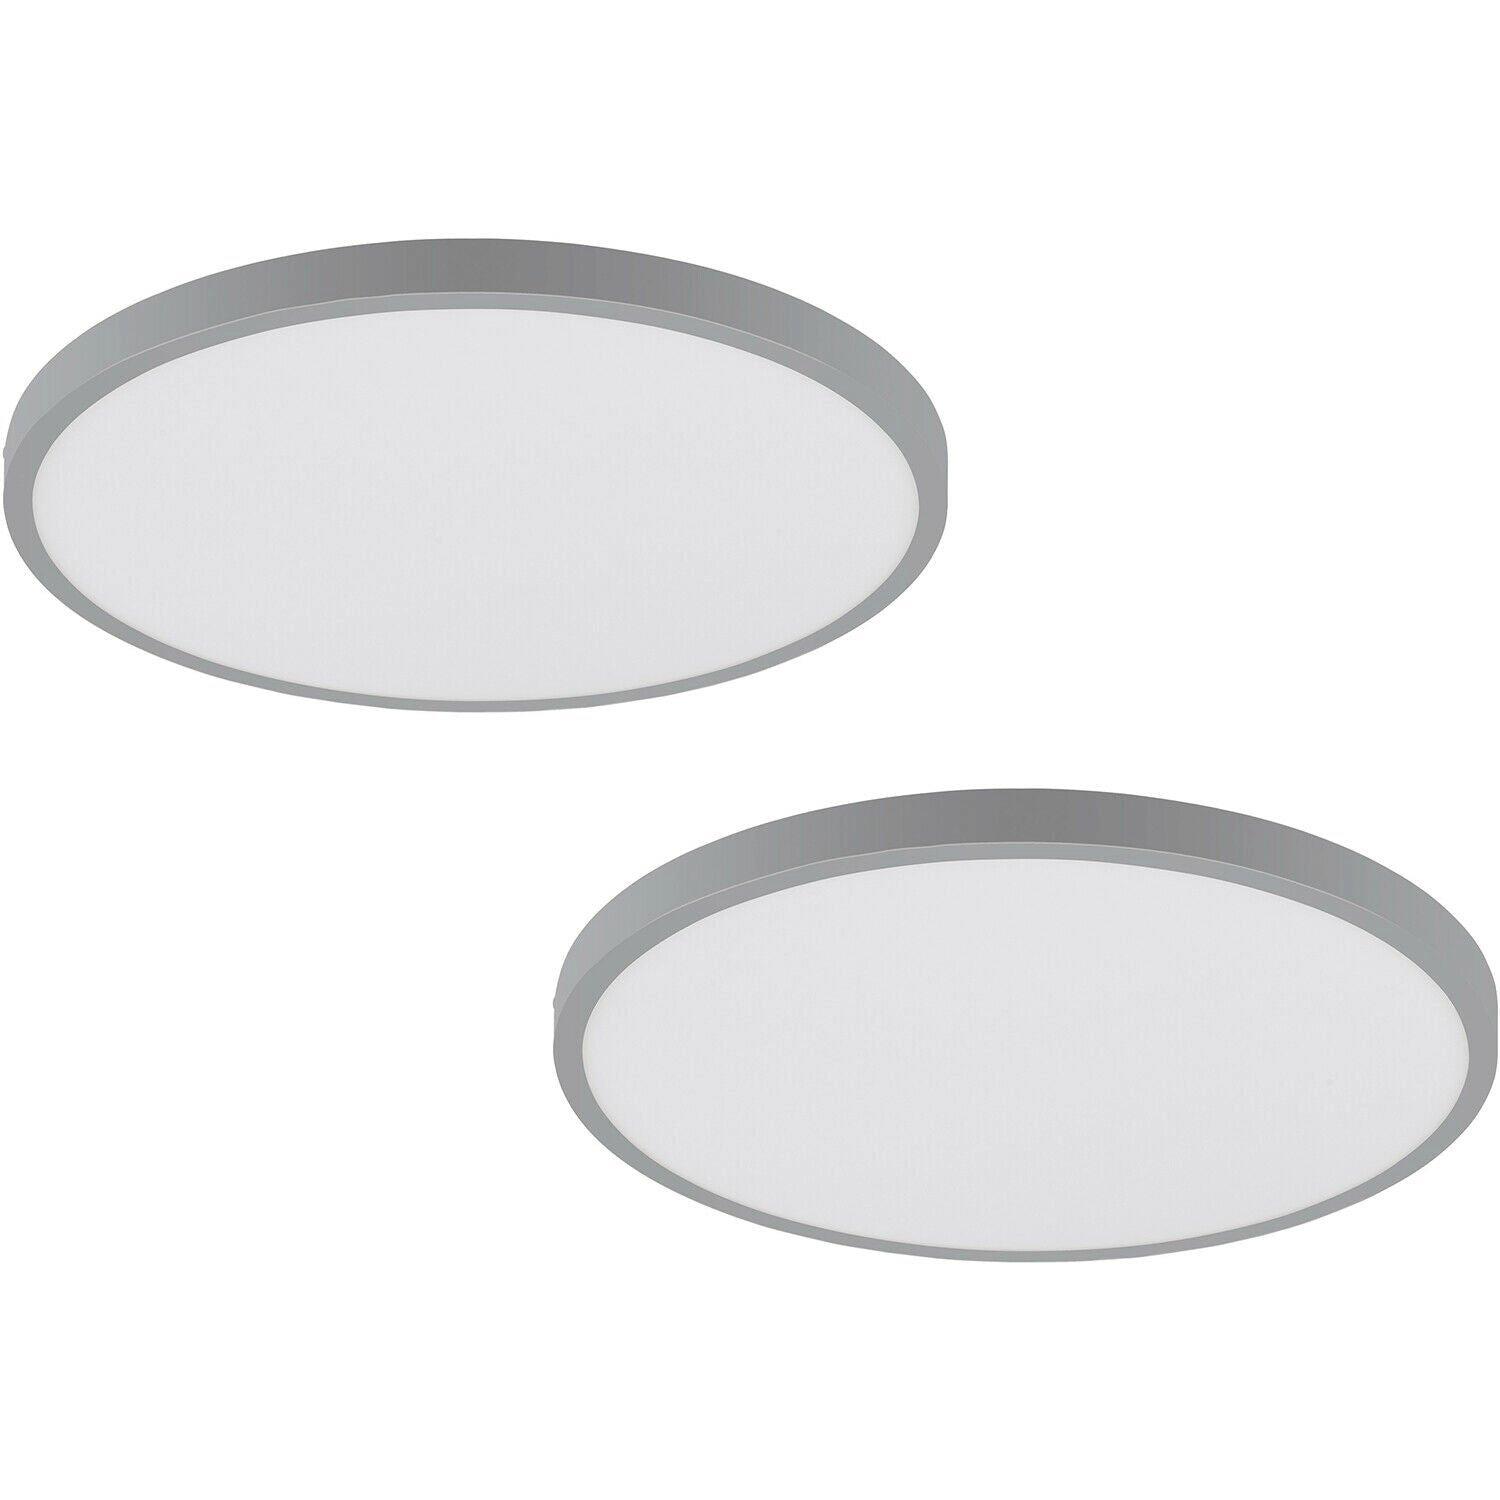 2 PACK Wall / Ceiling Light Silver 400mm Round Surface Mounted 25W LED 3000K